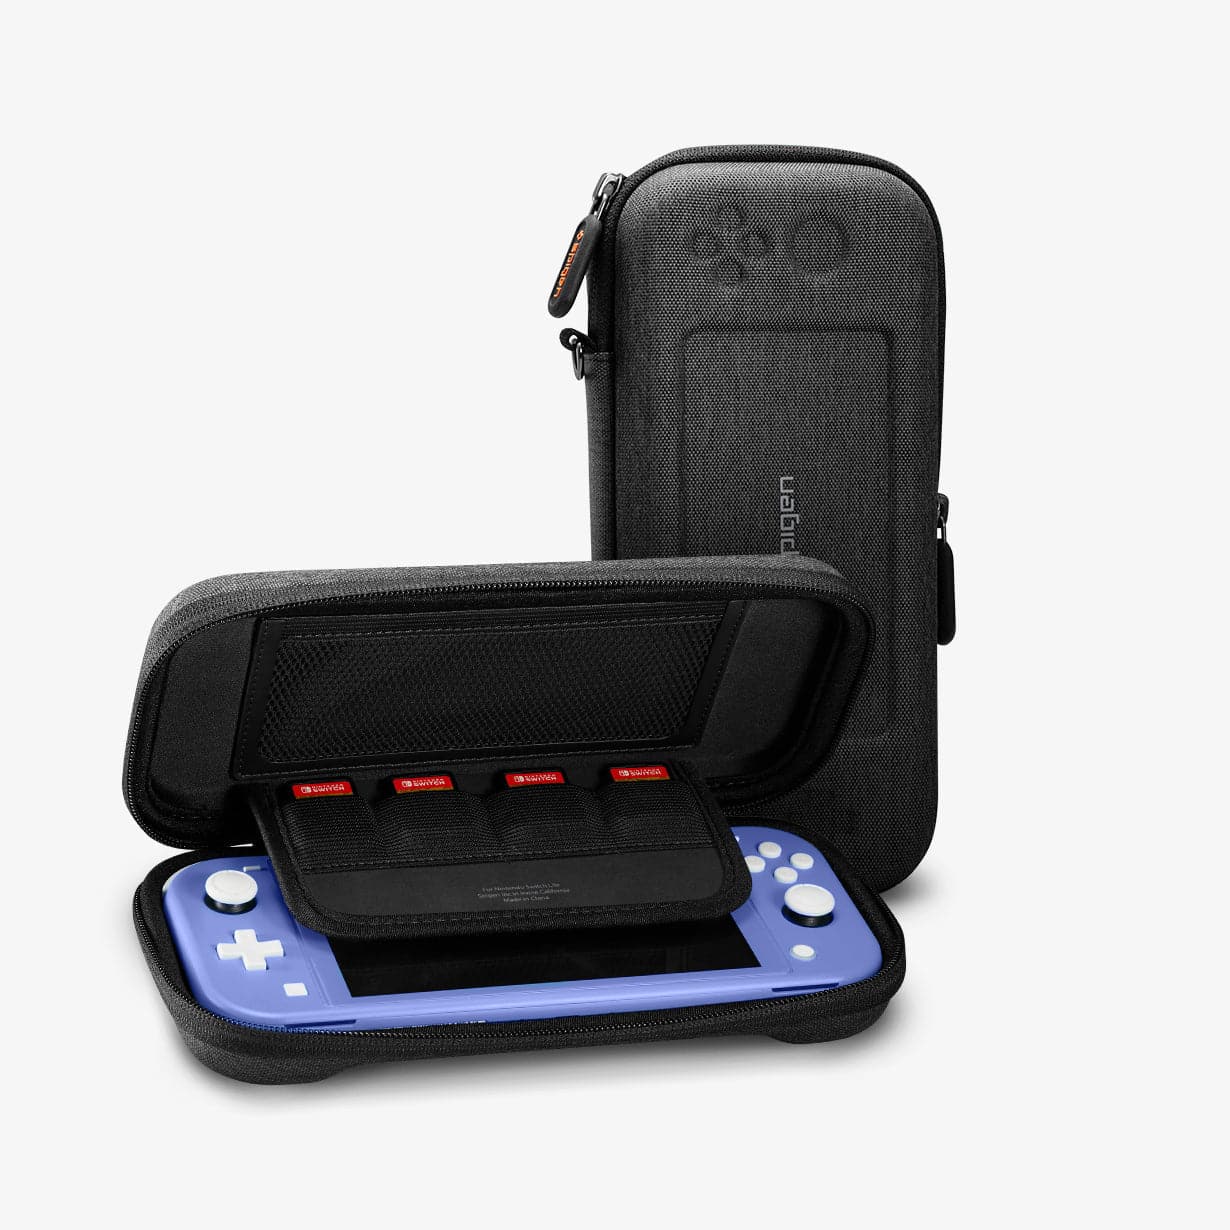 AFA00865 - Nintendo Switch Lite Case Klasden Pouch showing the device inside of case and front